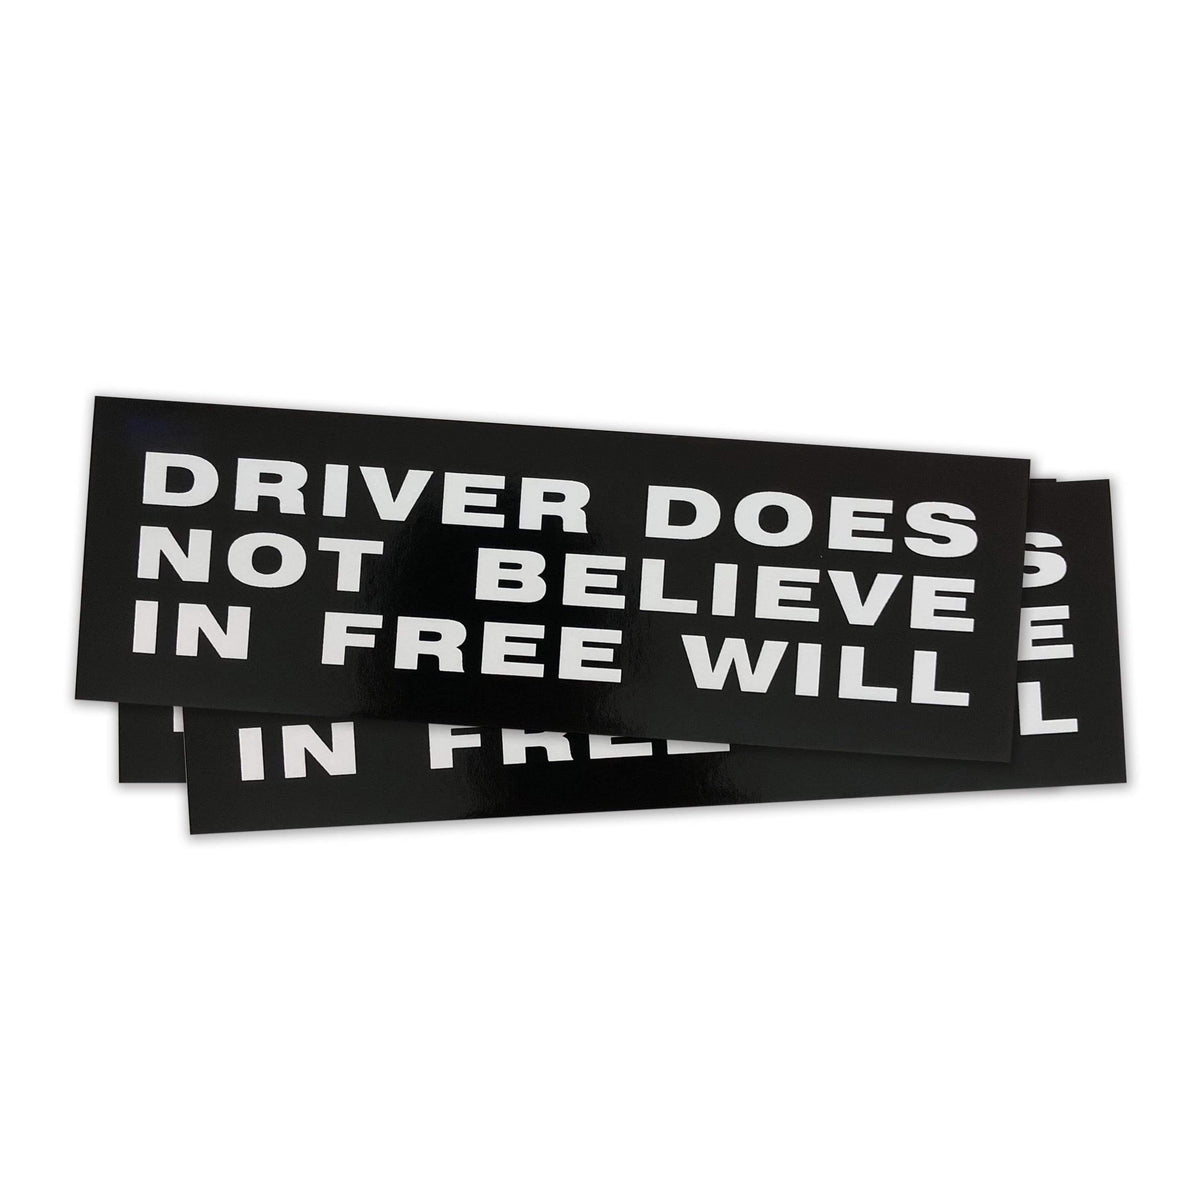 The Flenser Apparel Wreck and Reference &quot;Does Not Believe In Free Will&quot; Sticker